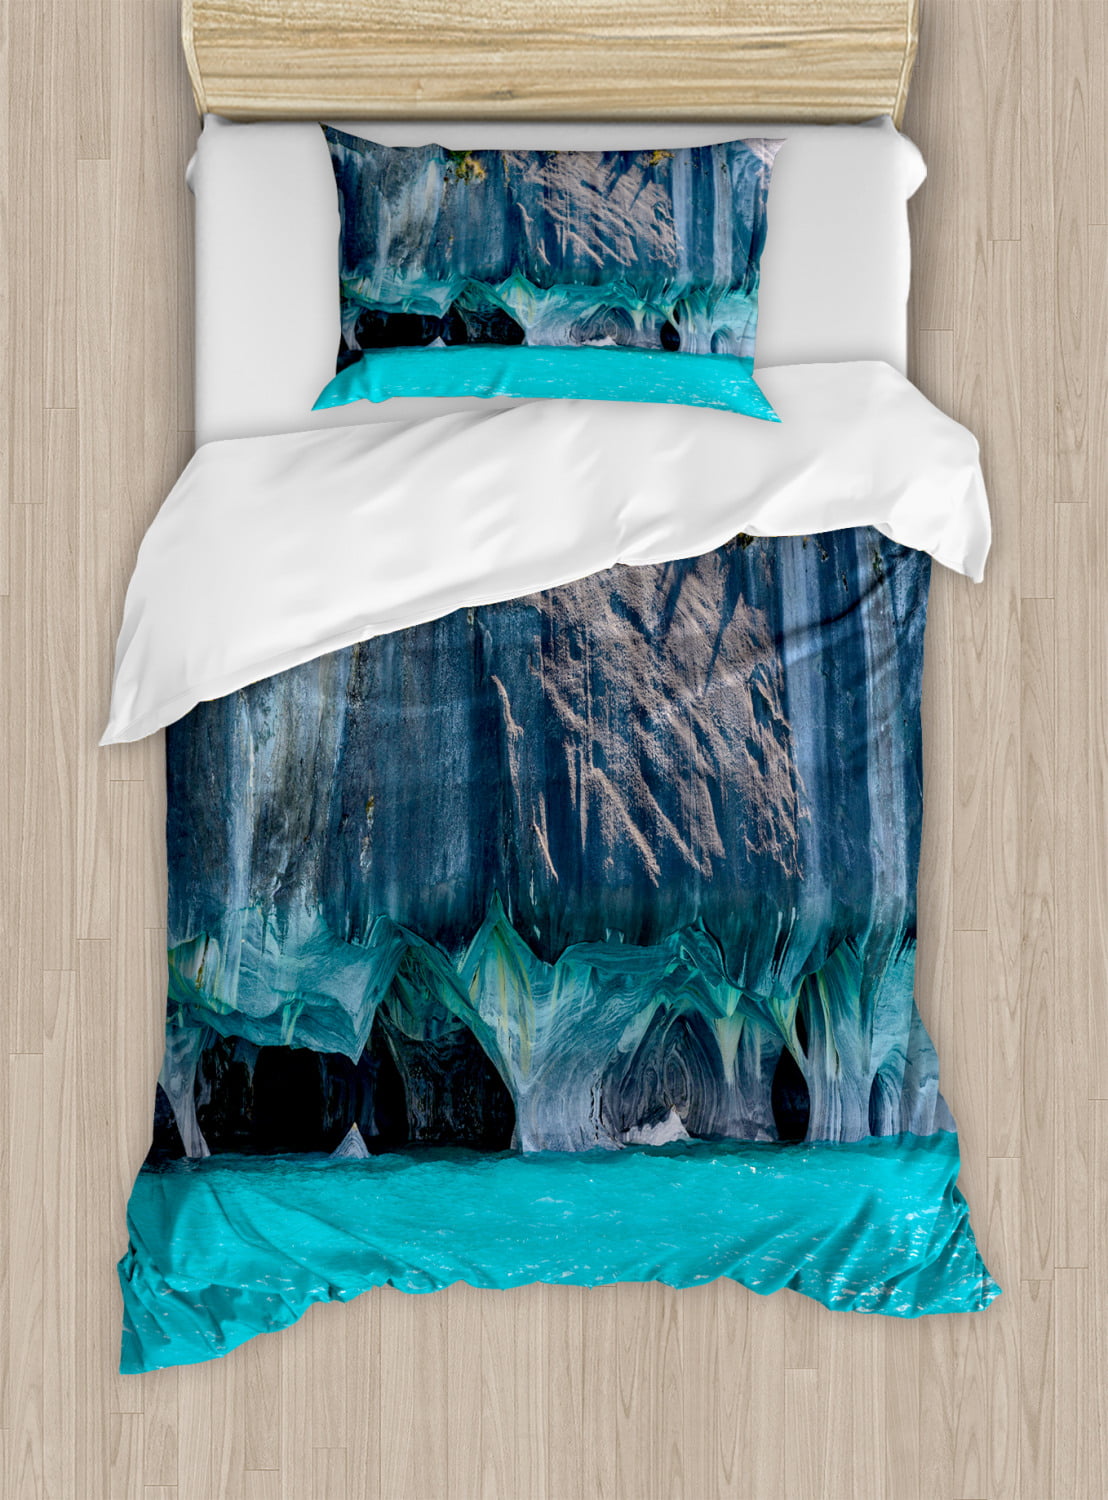 Turquoise Duvet Cover Set Twin Size, Marble Caves of Lake General Carrera  Chile South American Natural, Decorative 2 Piece Bedding Set with 1 Pillow  Sham, Turquoise Purplegrey Green, by Ambesonne 